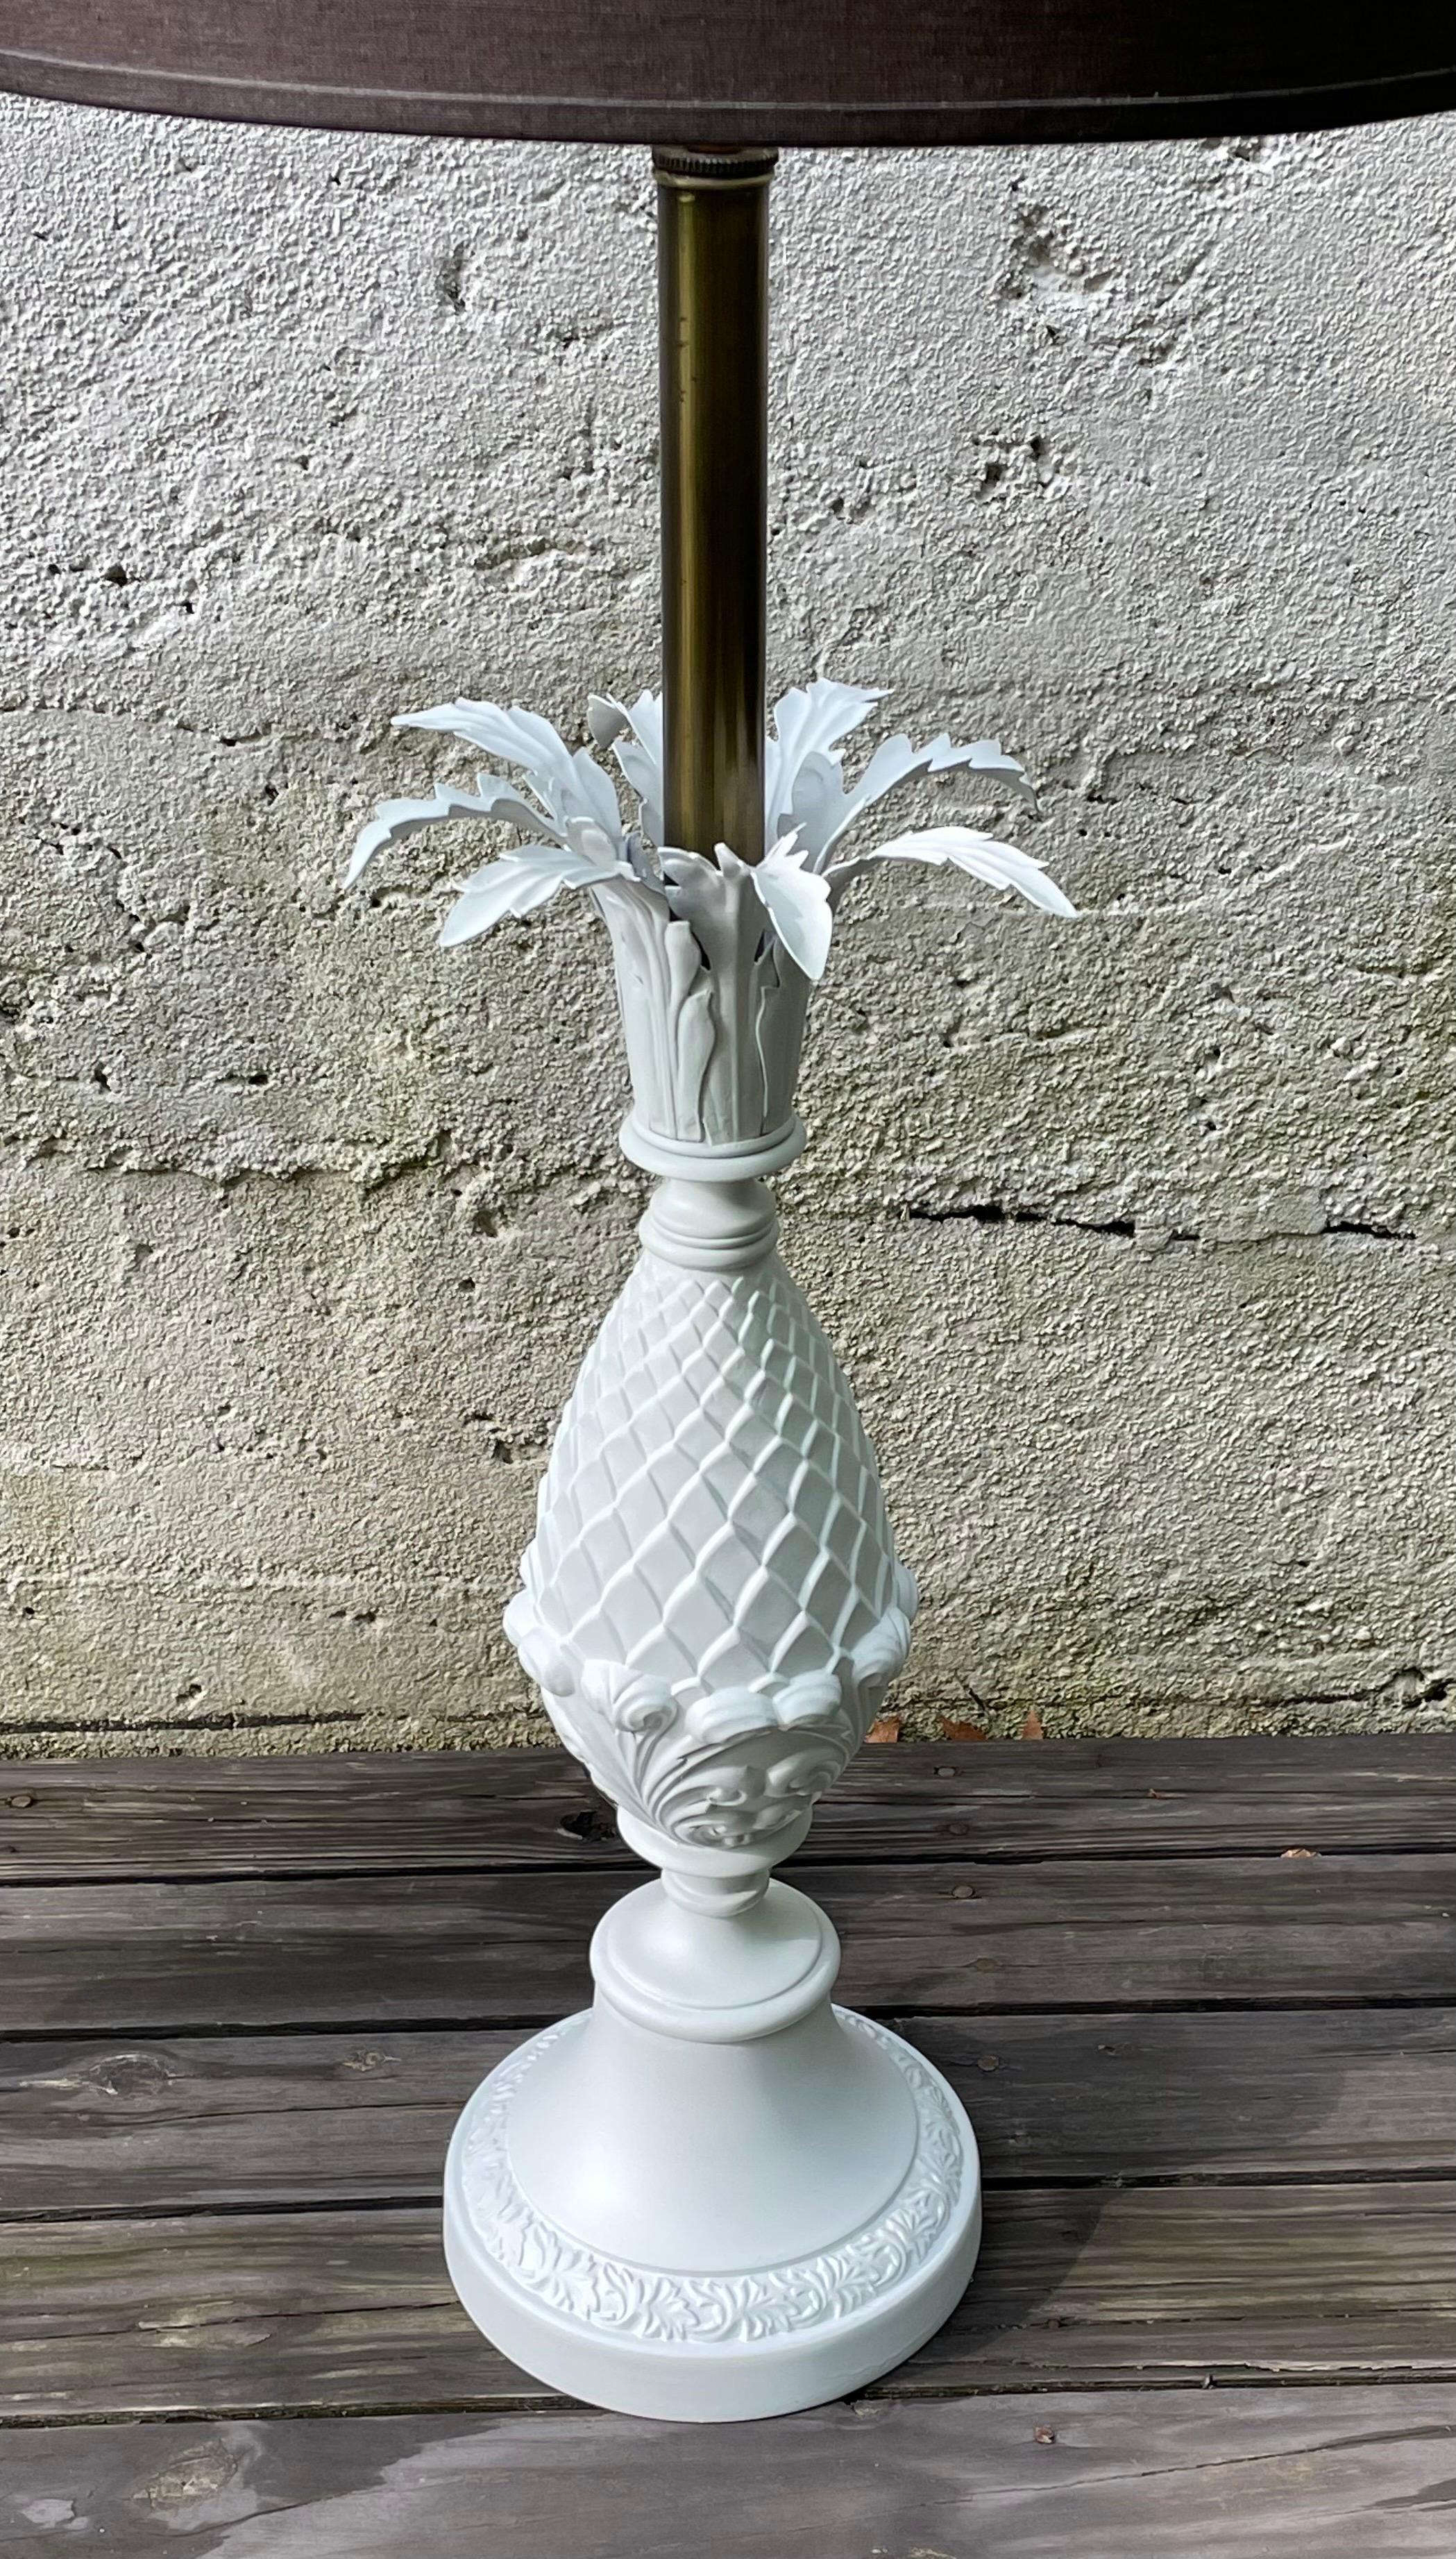 Stunning pair of Hollywood Regency table lamps, pineapple shape with leafs, painted brilliant white, large scale. Rewired, shades and harps not included.